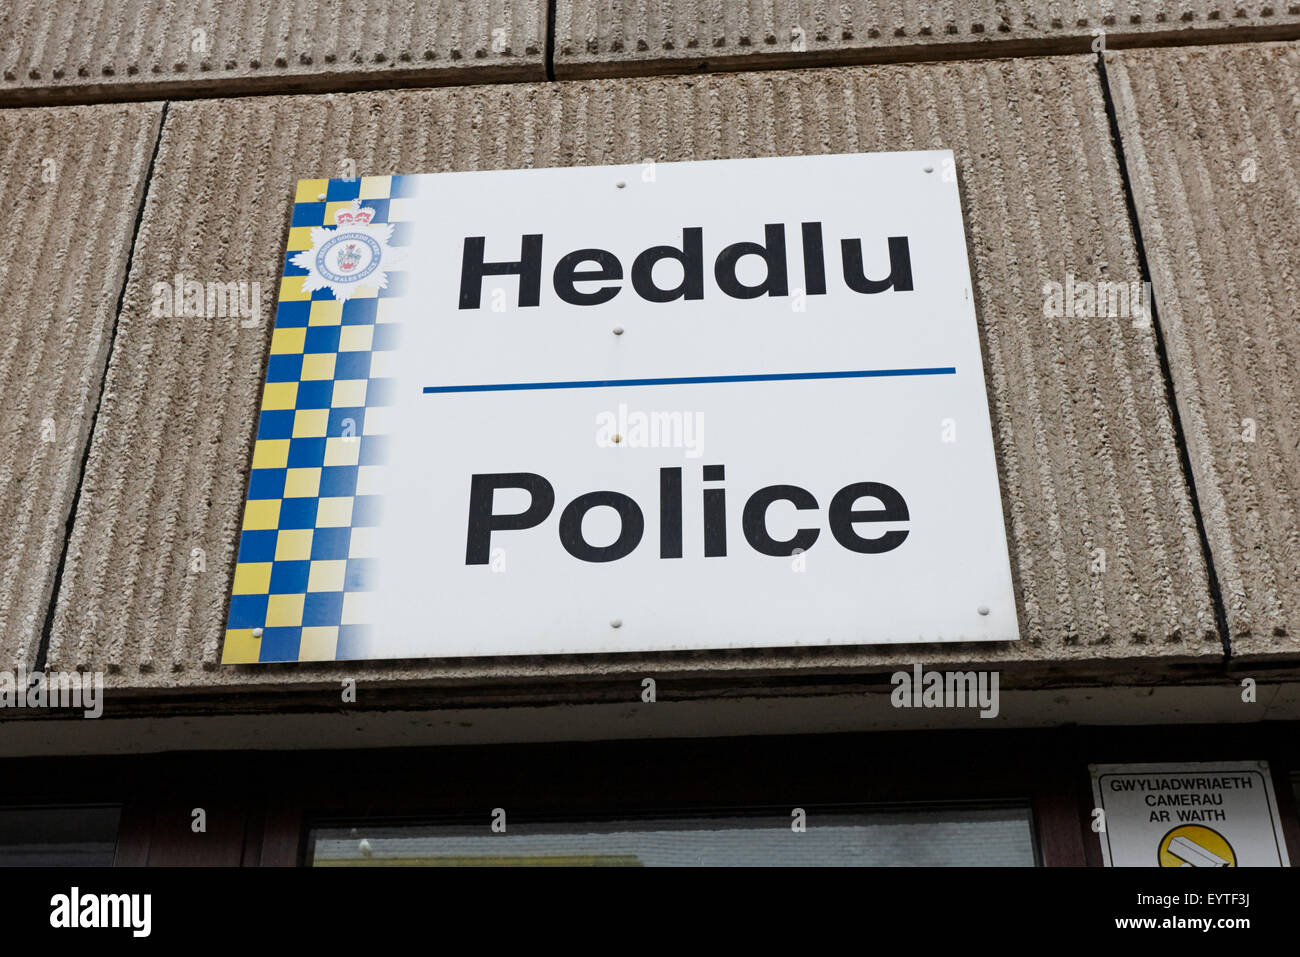 bilingual welsh and english heddlu police sign on north wales police station Stock Photo